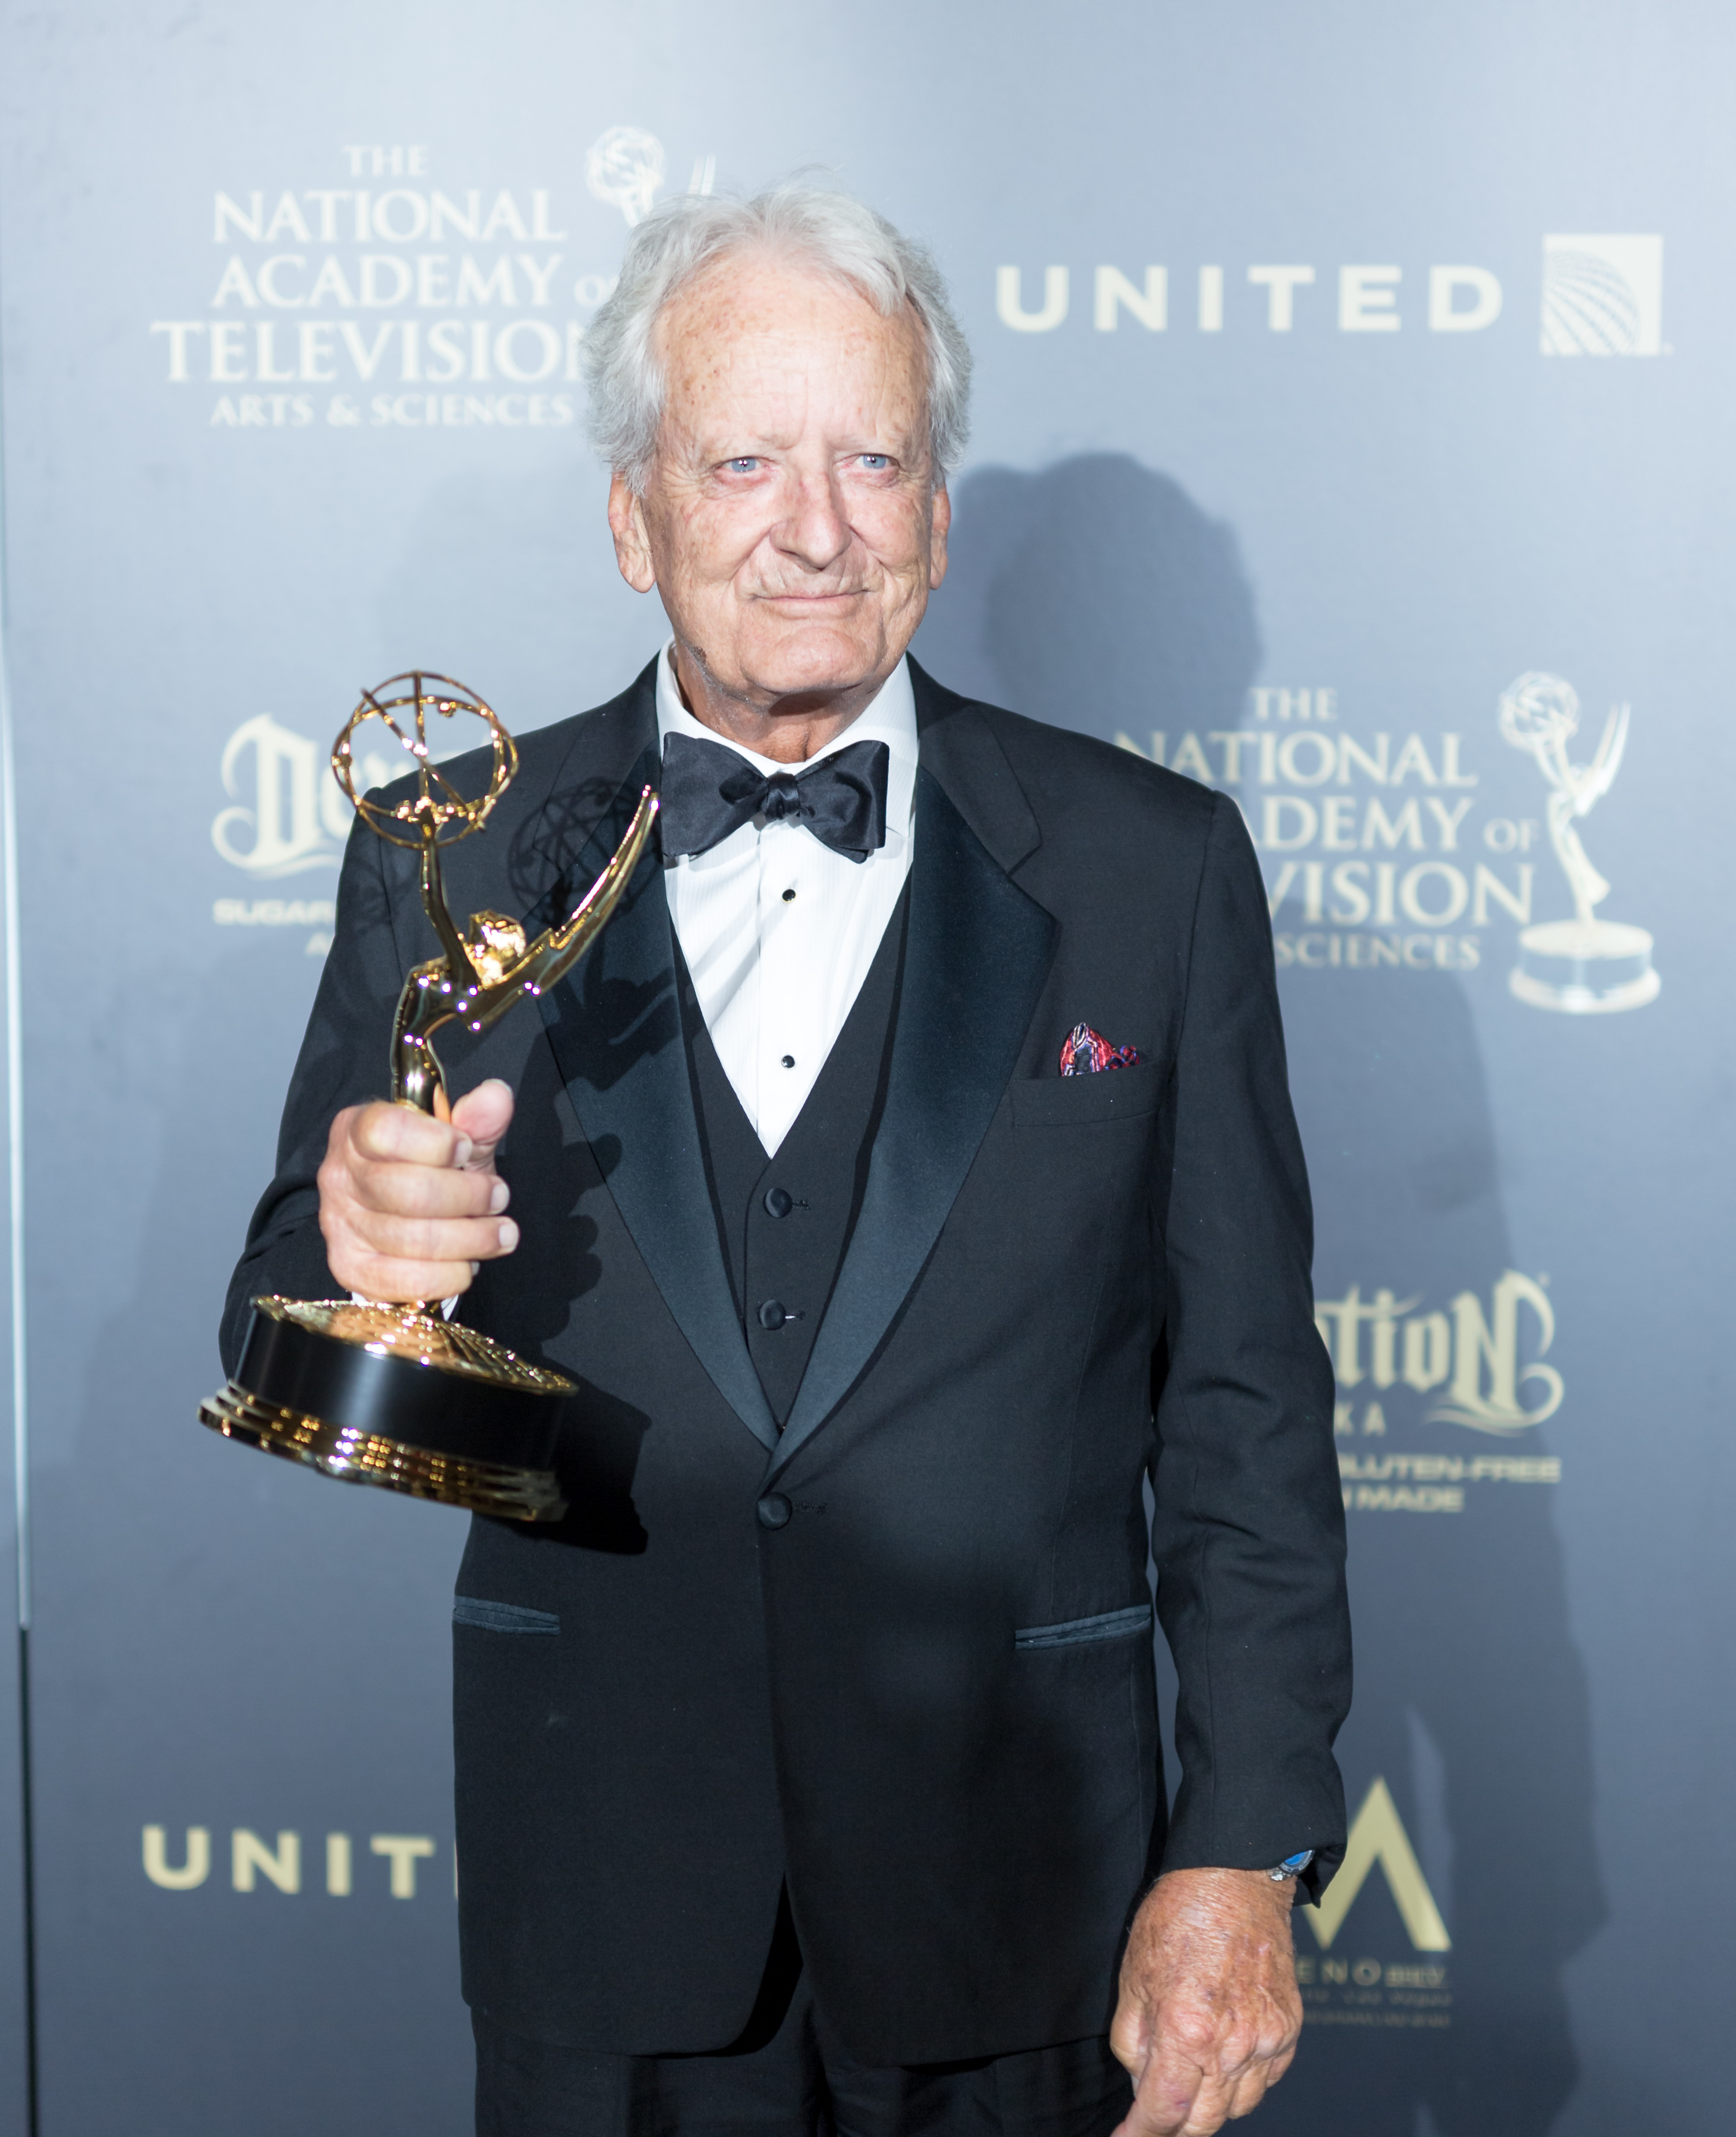 Nicolas Coster displays his Emmy Award at the 44th Annual Daytime Creative Arts Emmy Awards in Pasadena, California, on April 28, 2017. | Source: Getty Images